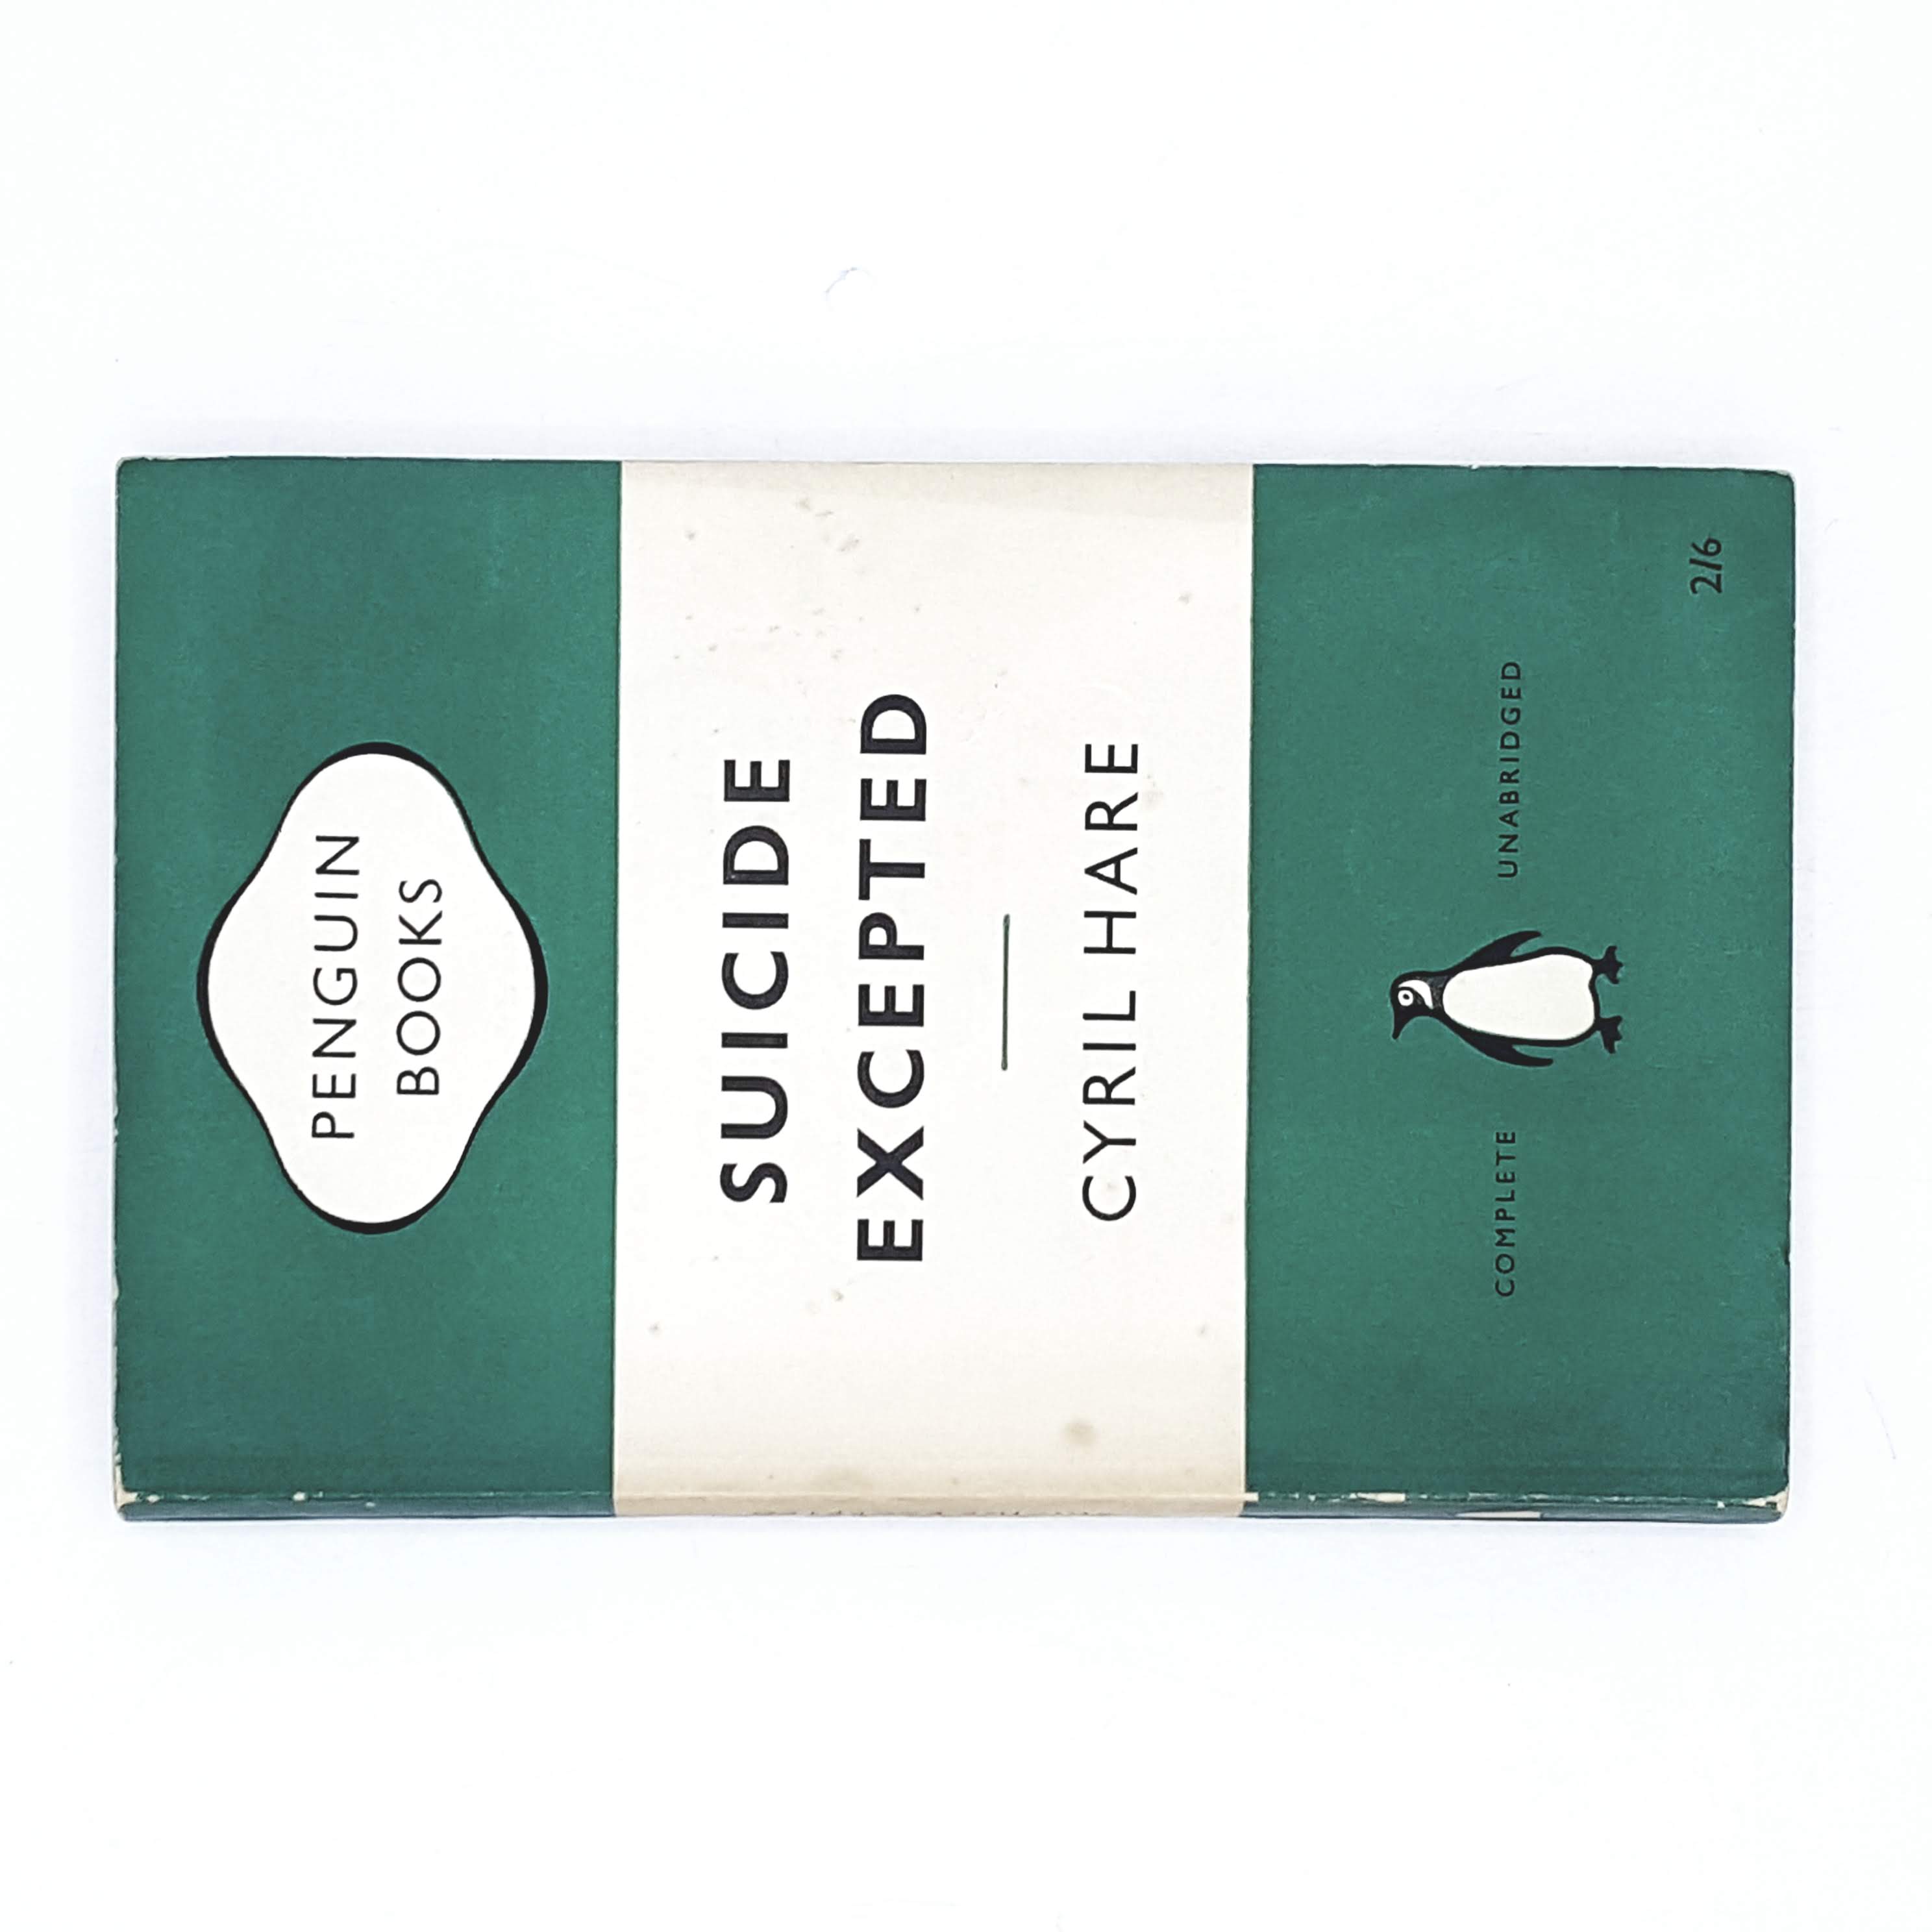 SUICIDE EXPECTED BY CYRIL HARE 1956 - PENGUIN